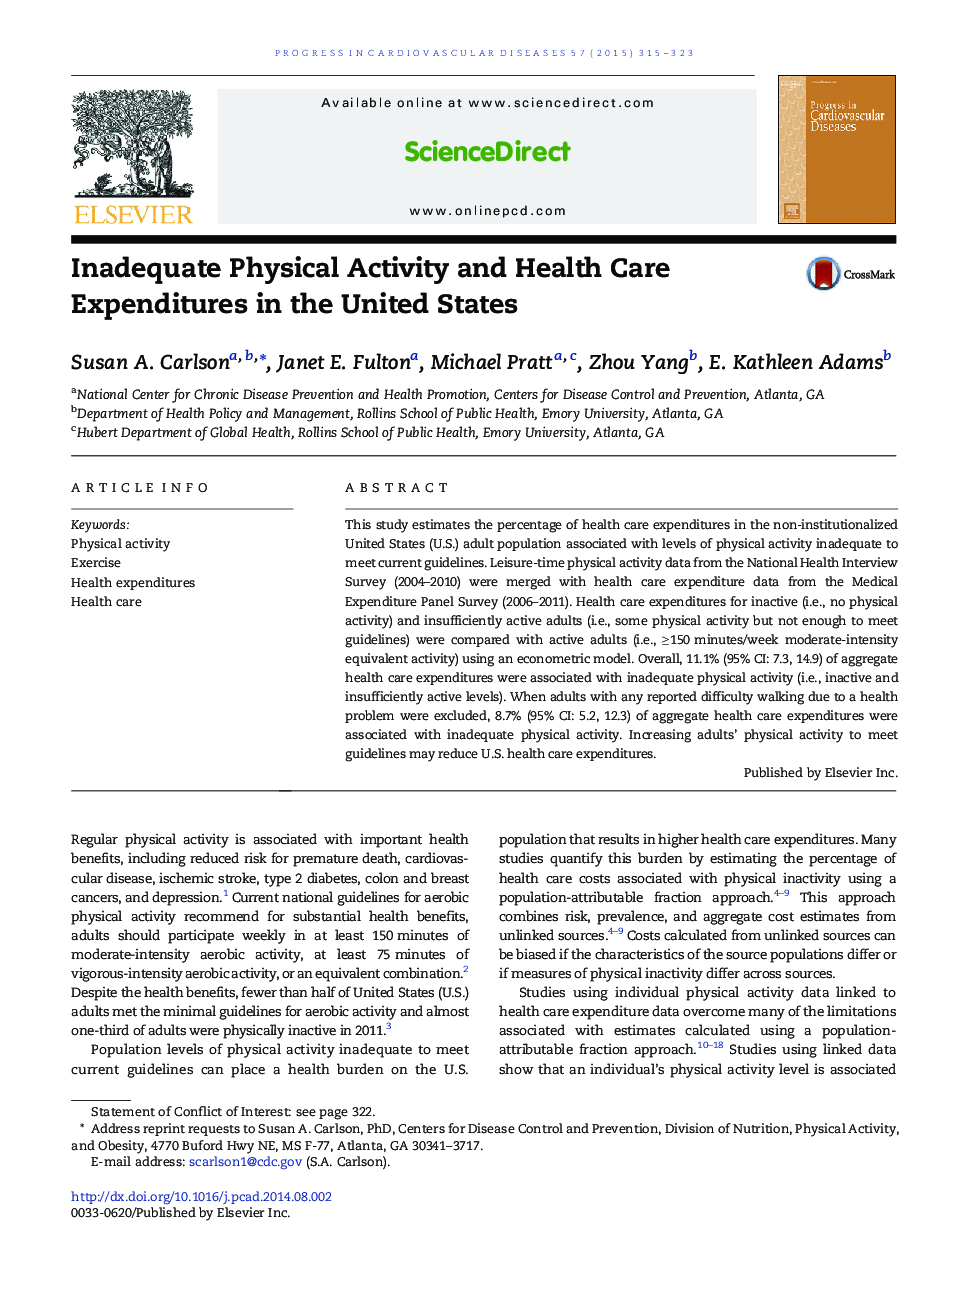 Inadequate Physical Activity and Health Care Expenditures in the United States 